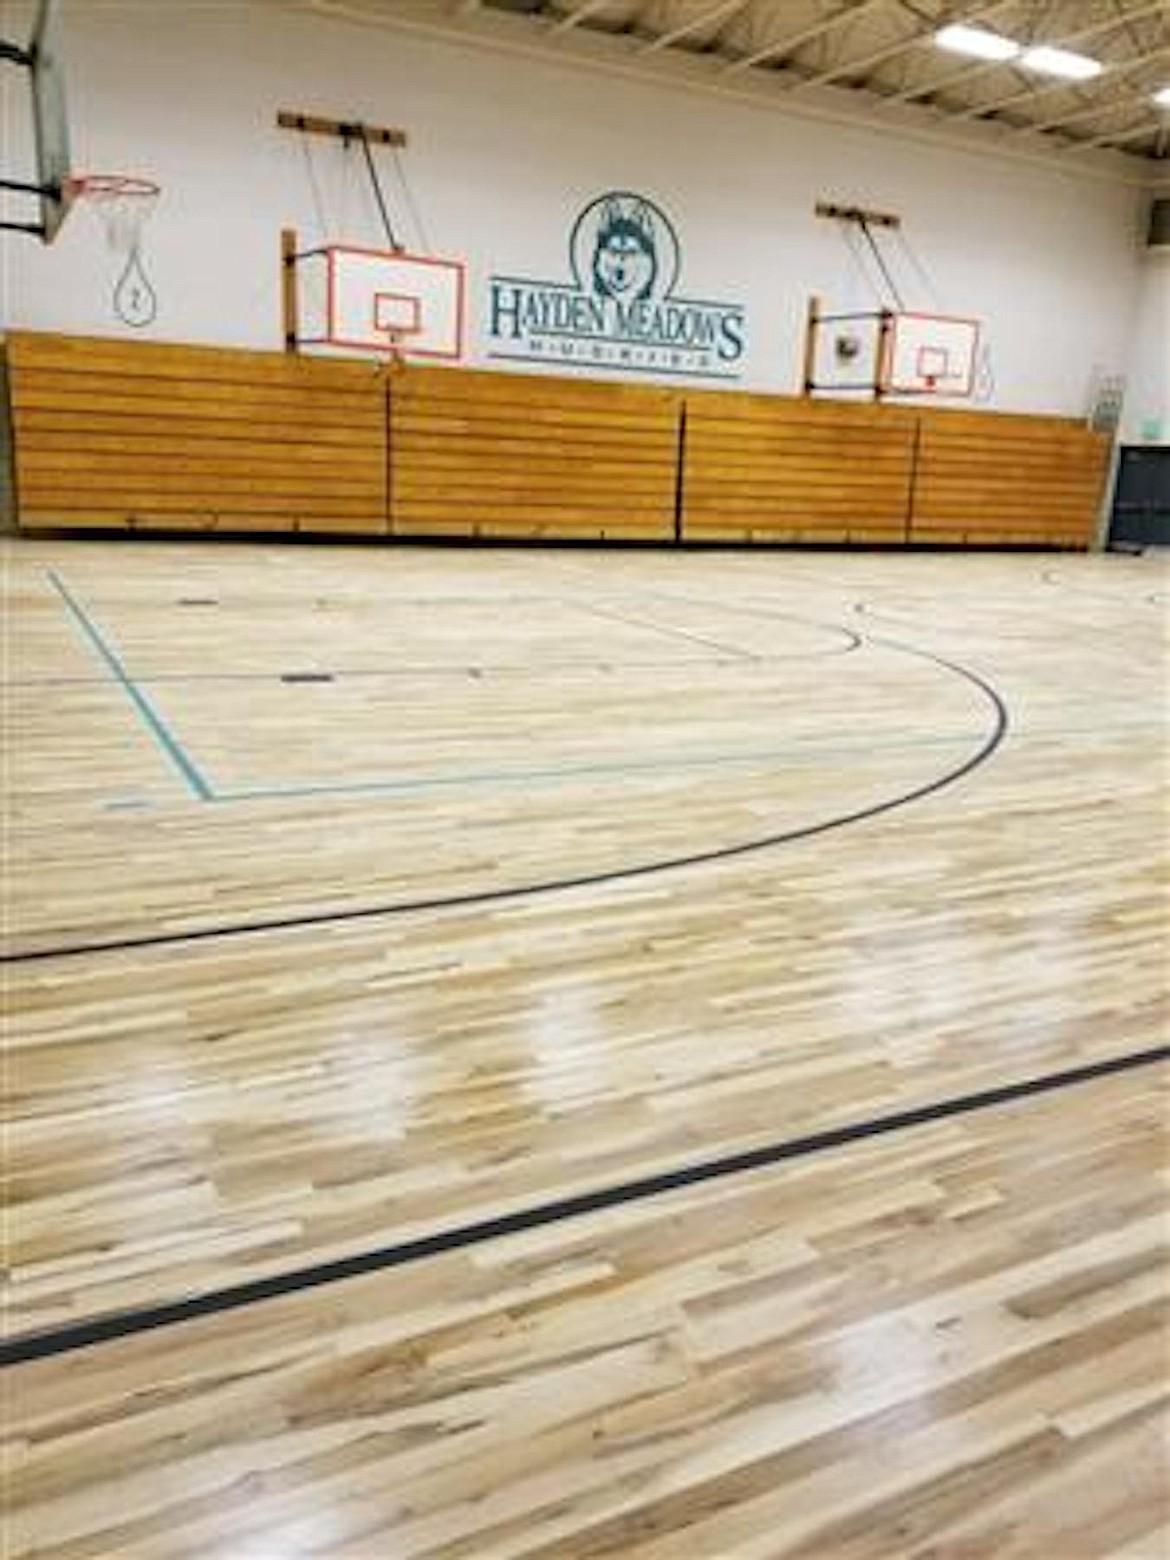 The&#160;Hayden Meadows gymnasium had old carpet instead of wood flooring.&#160;In 2017, the carpet was torn out and a new wood floor was installed. (Courtesy photo)